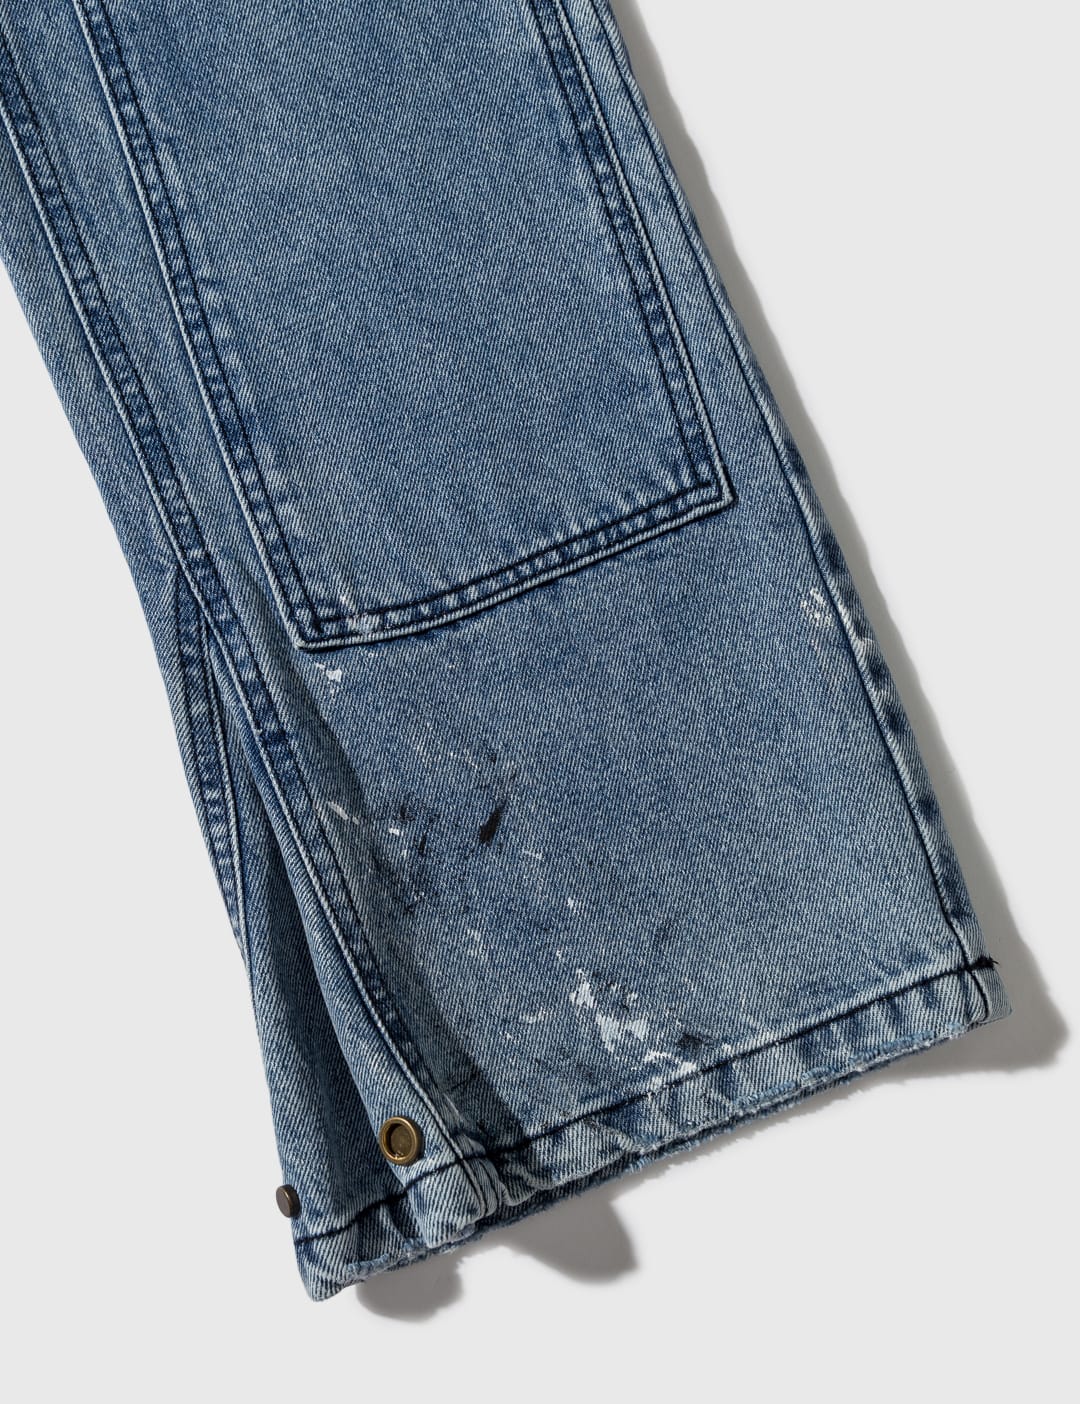 Someit - S.O.G Vintage Denim Pants | HBX - Globally Curated